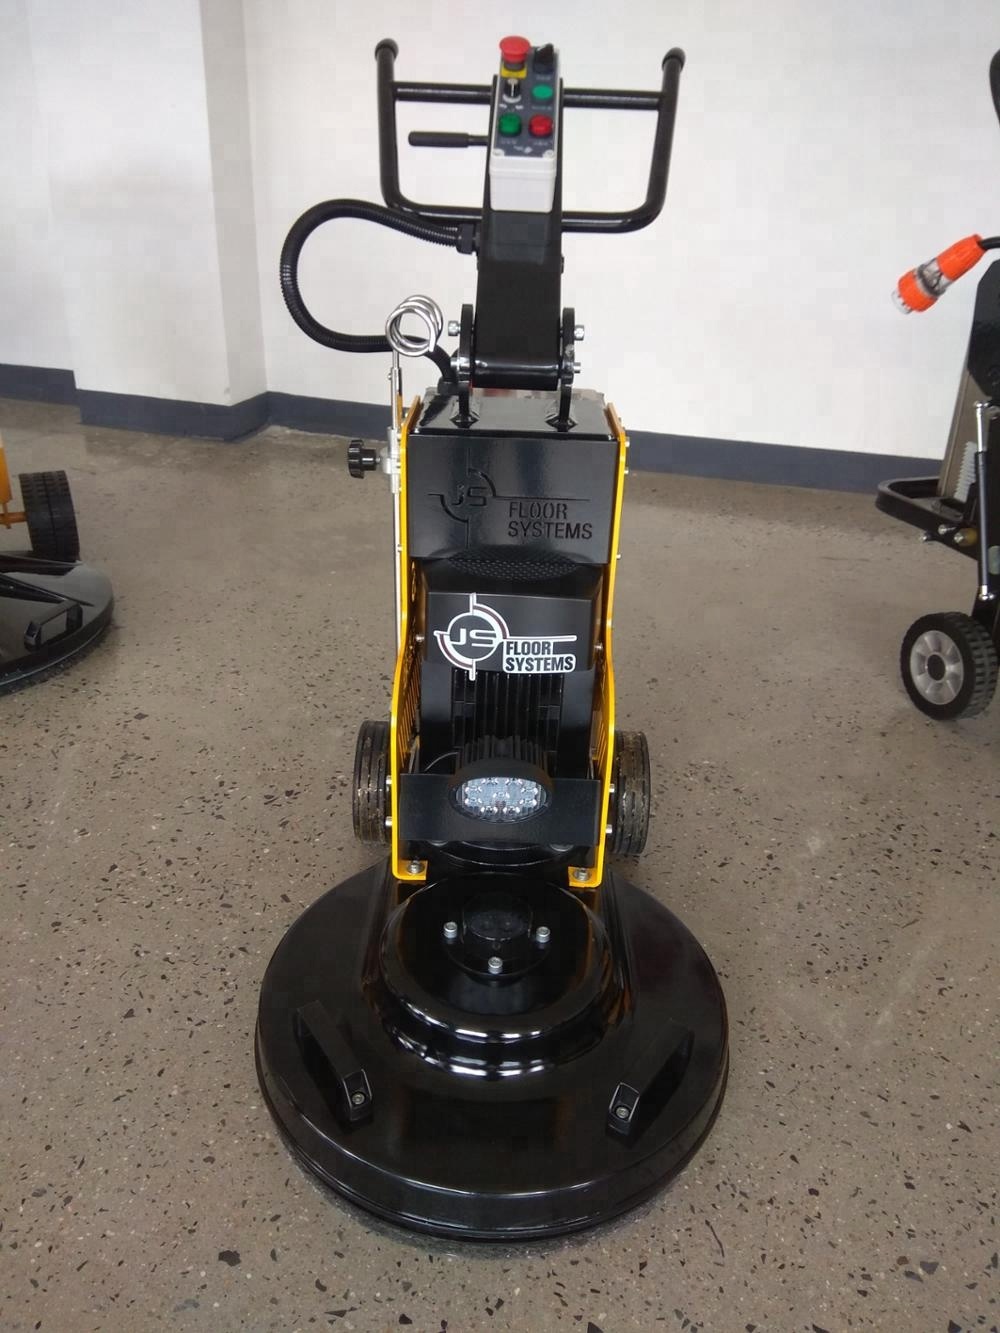 China 20 inch high speed floor burnisher Manufacturer and Factory